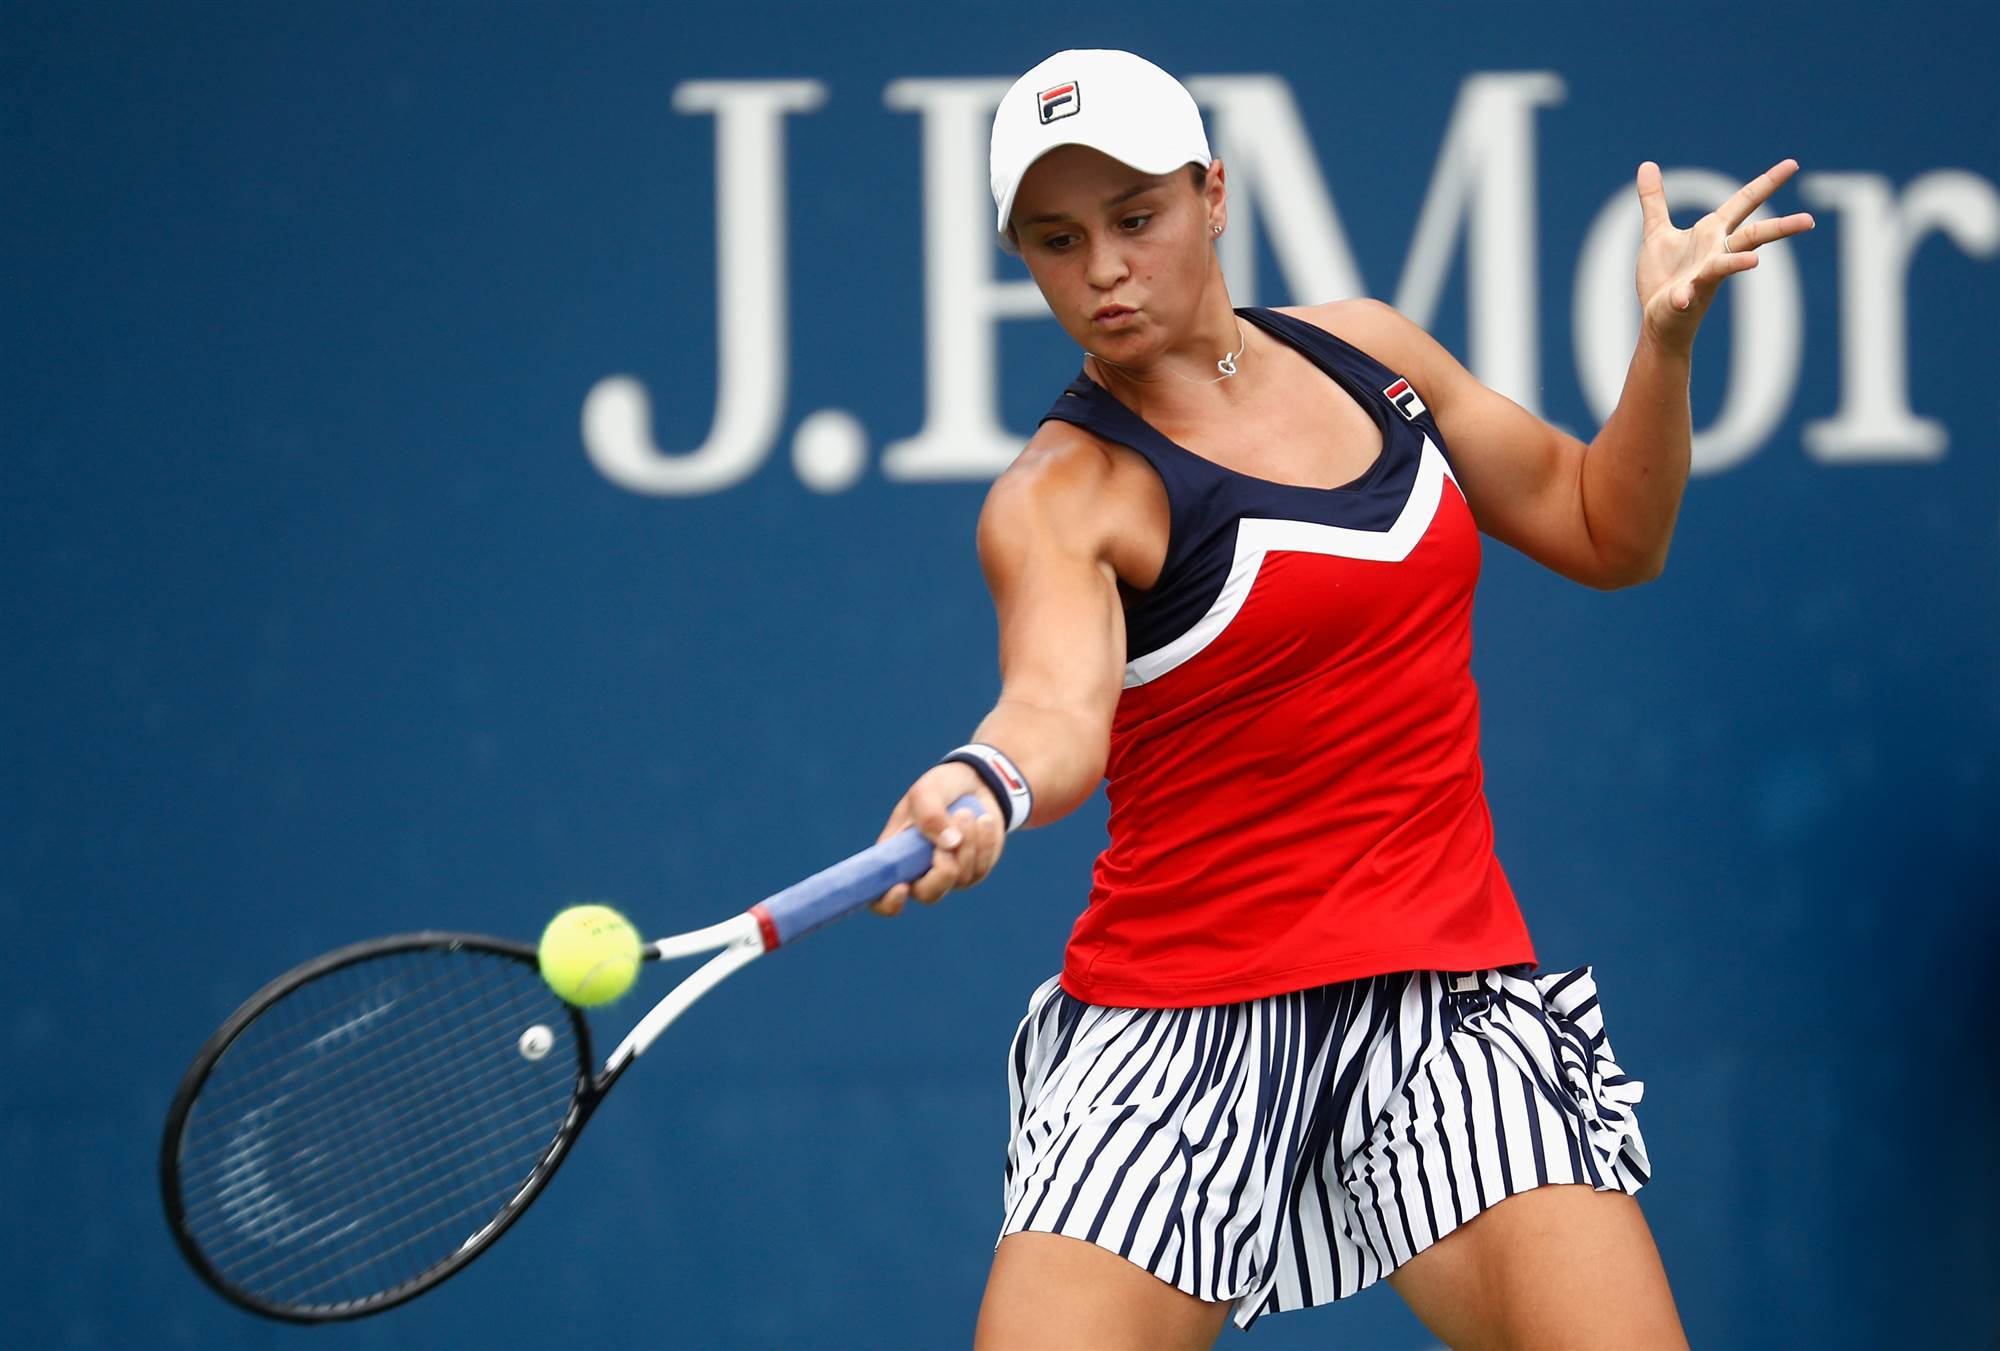 Barty's US Open singles campaign ends Tennis The Women's Game